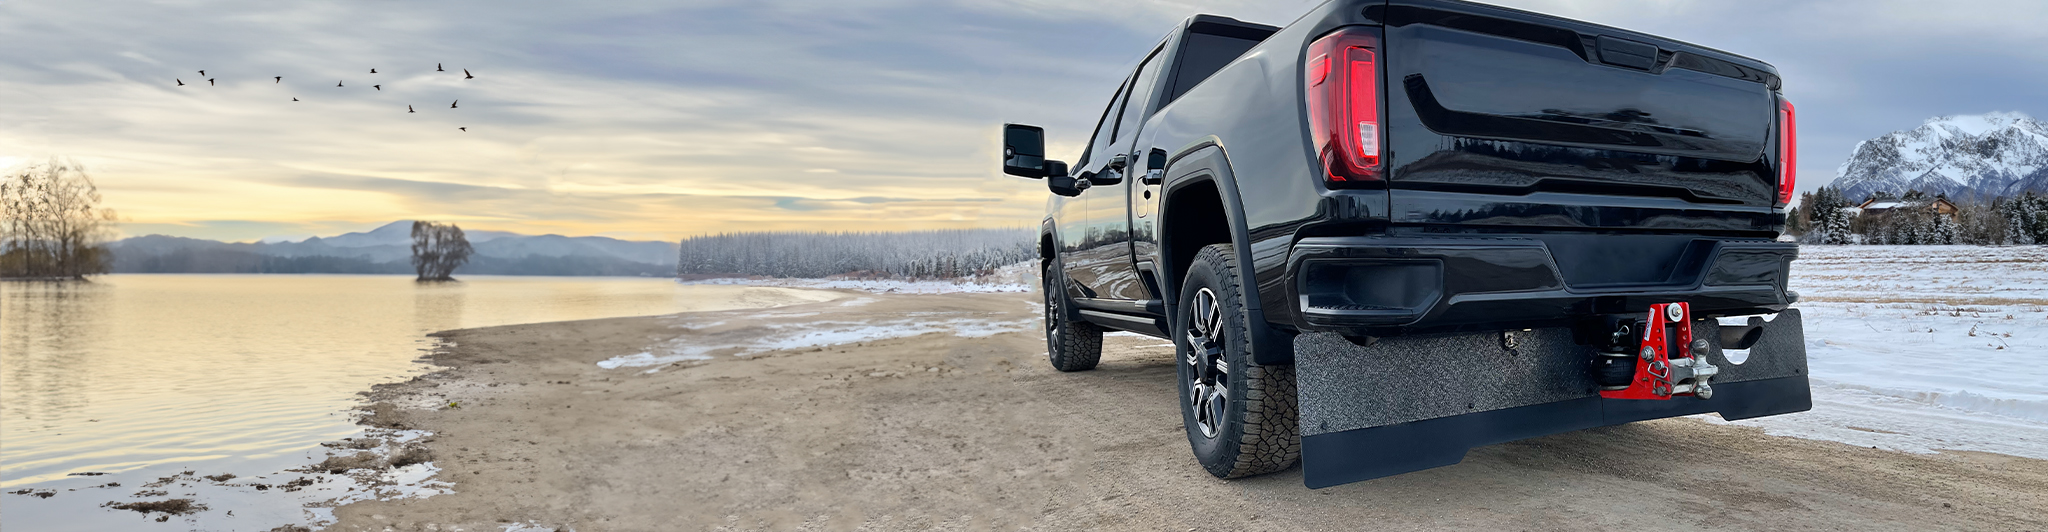 Towing Mud Flaps
Protect your trailer from rocks, mud, snow, and more